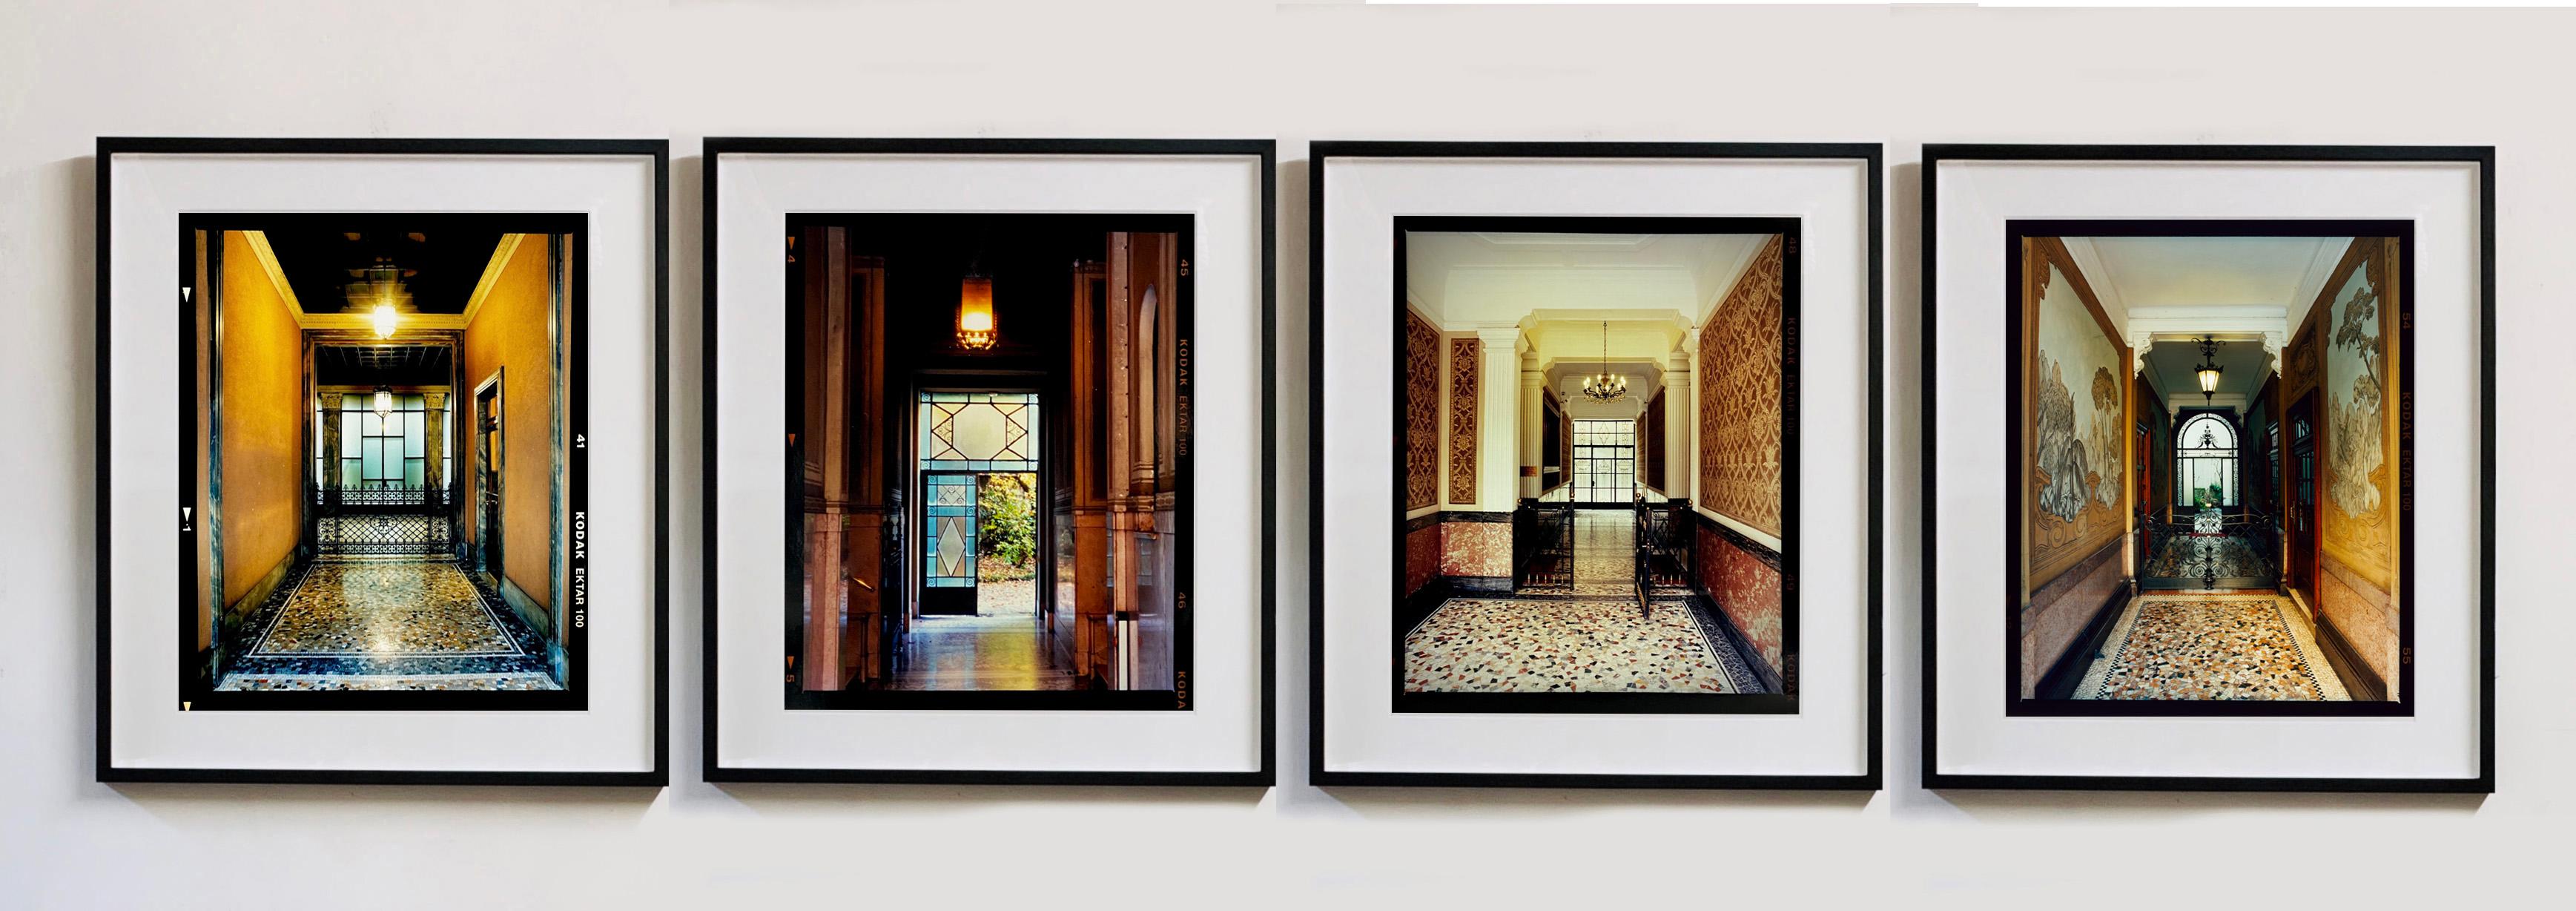 Foyer III, Milan - Italian architectural color photography For Sale 3